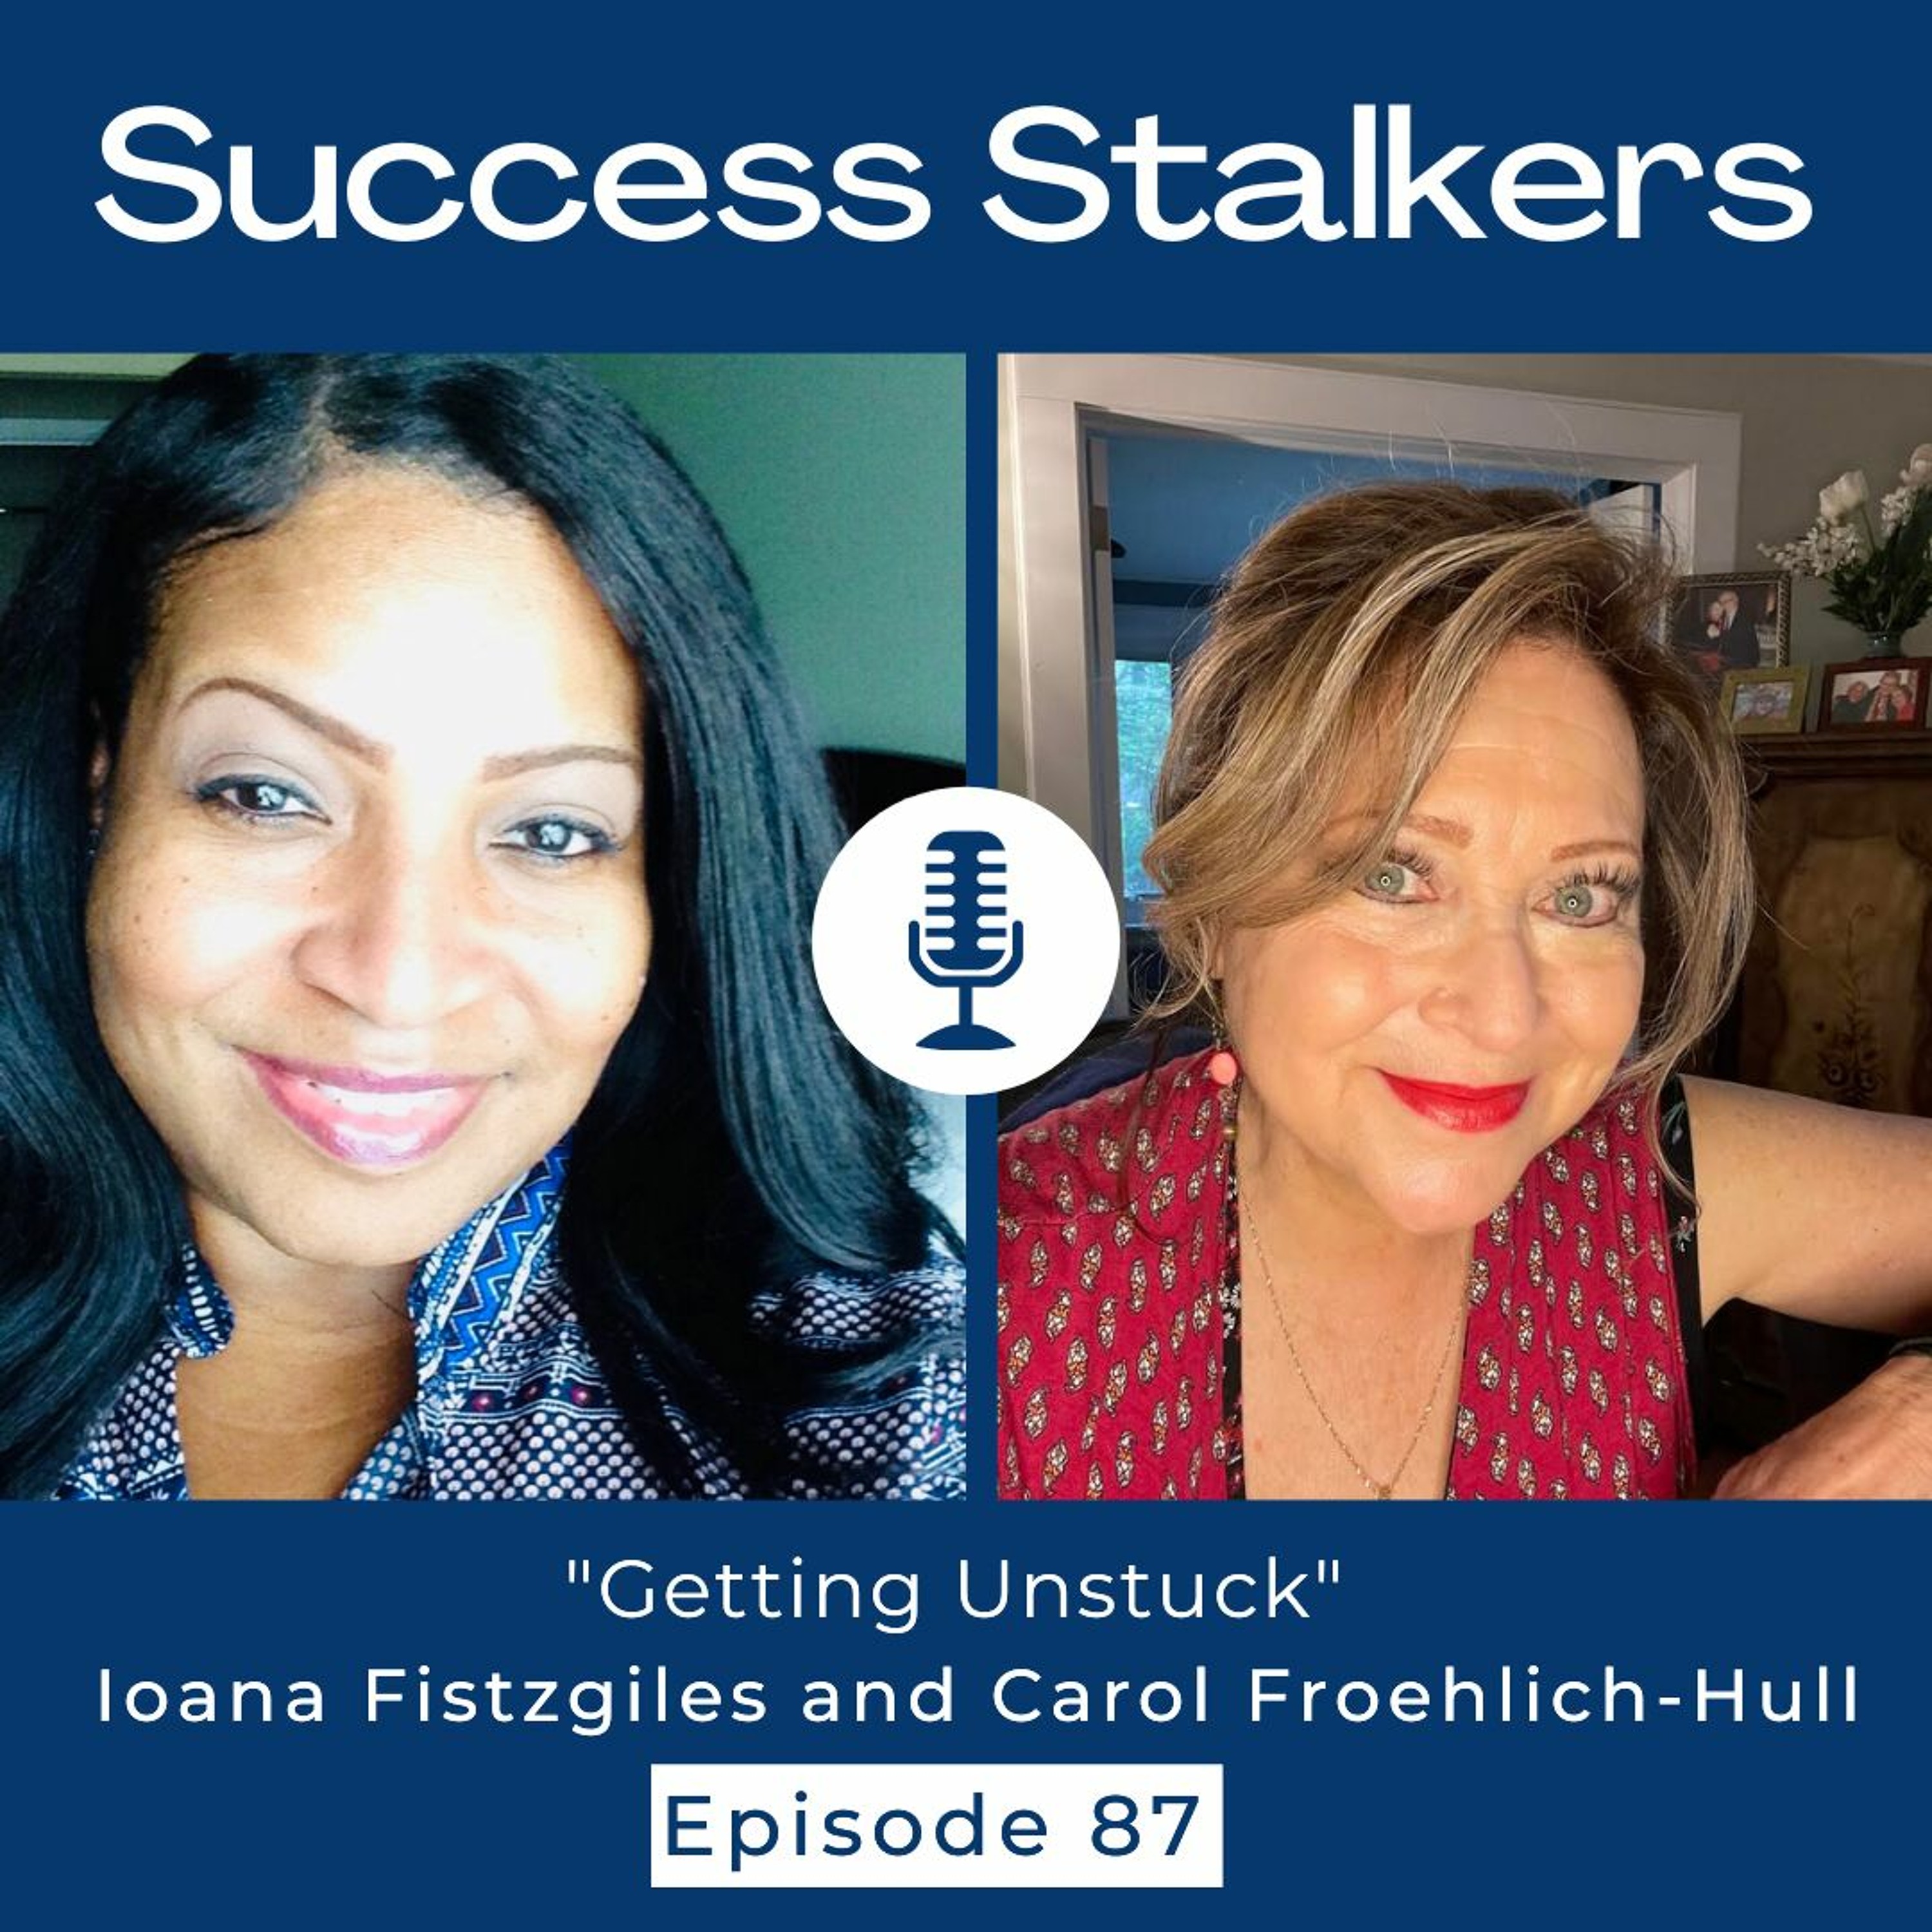 Episode 87: Getting Unstuck with Carol Froehlich-Hull